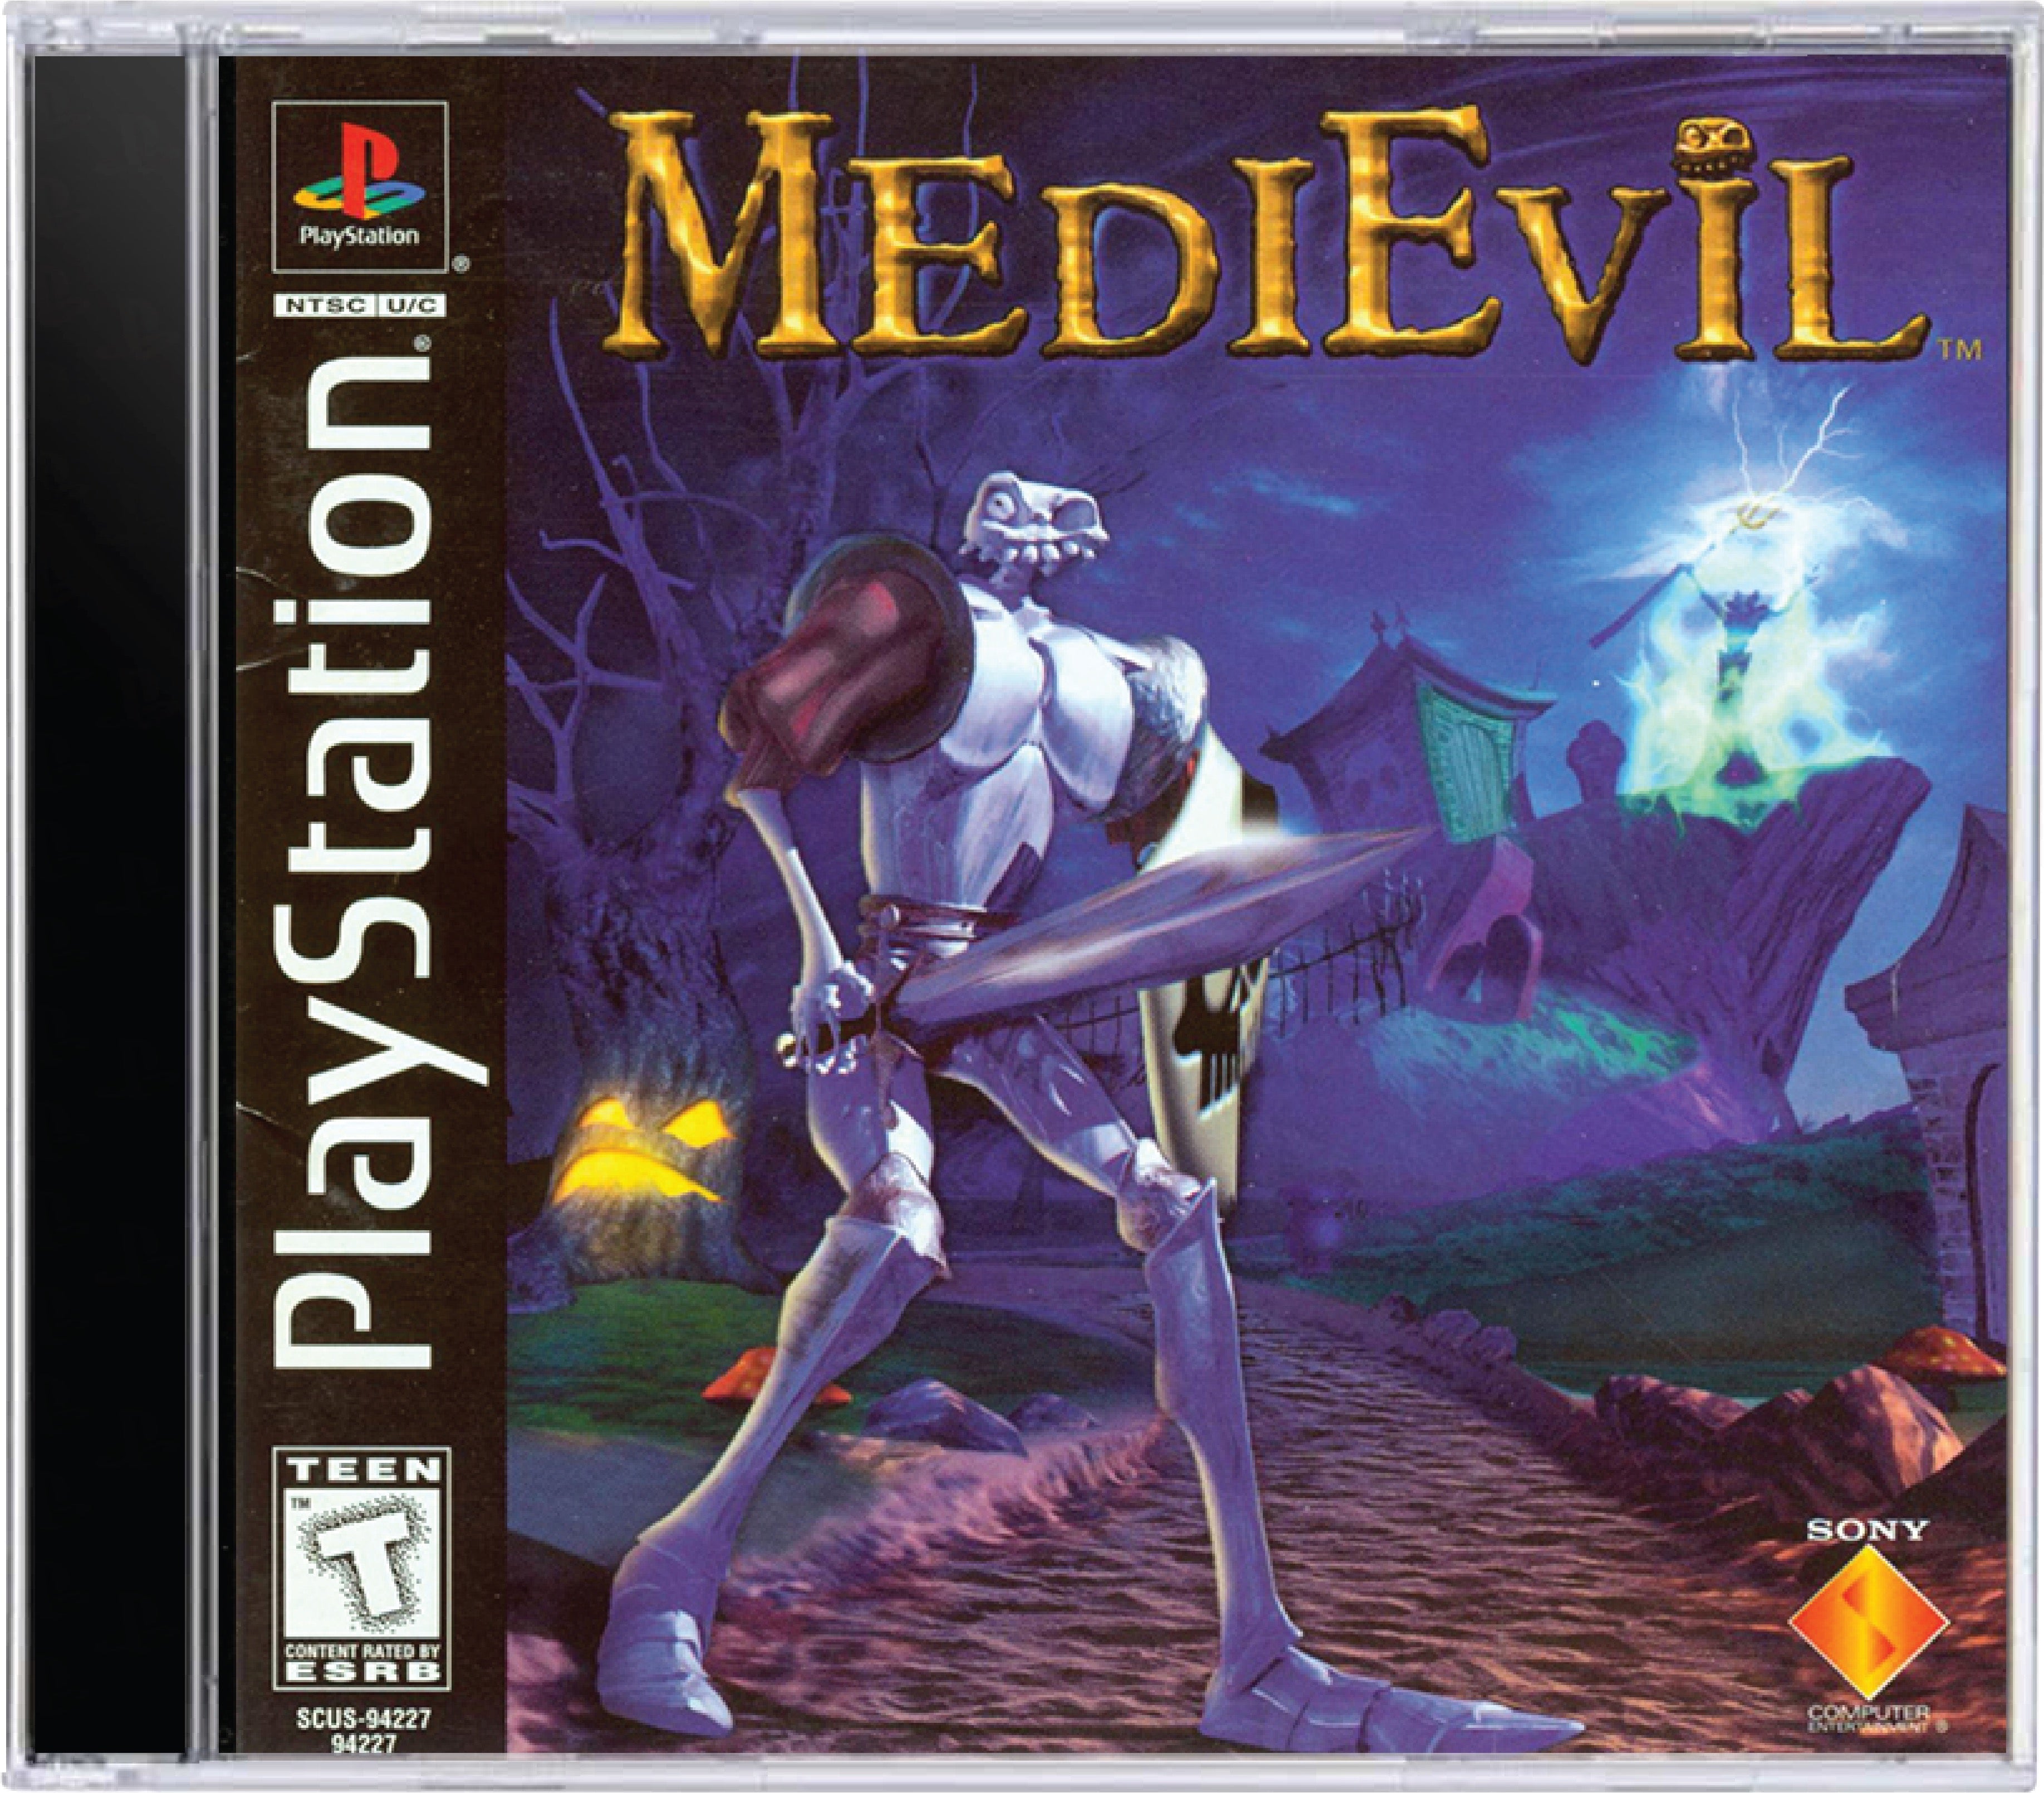 Medievil Cover Art and Product Photo